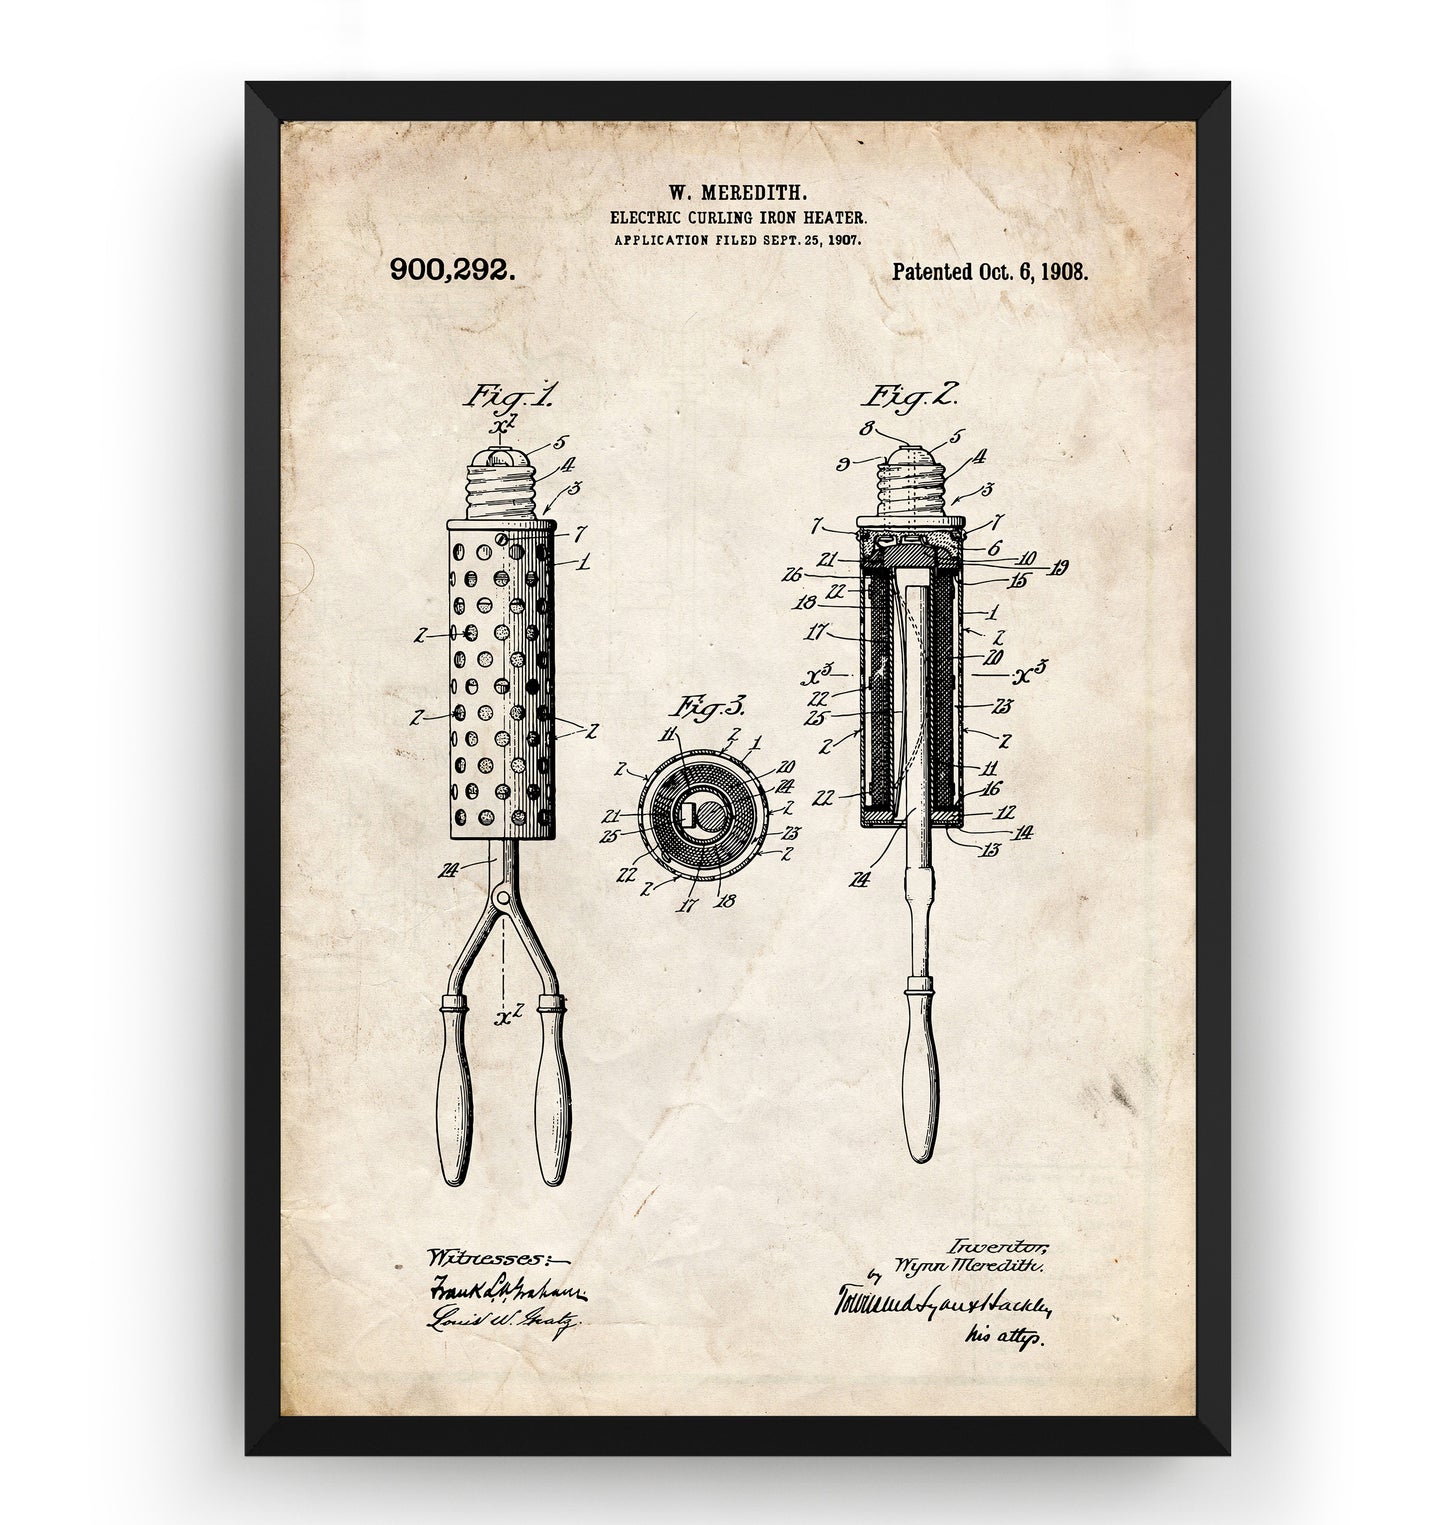 Electric Curling Iron Heater 1907 Patent Print - Magic Posters